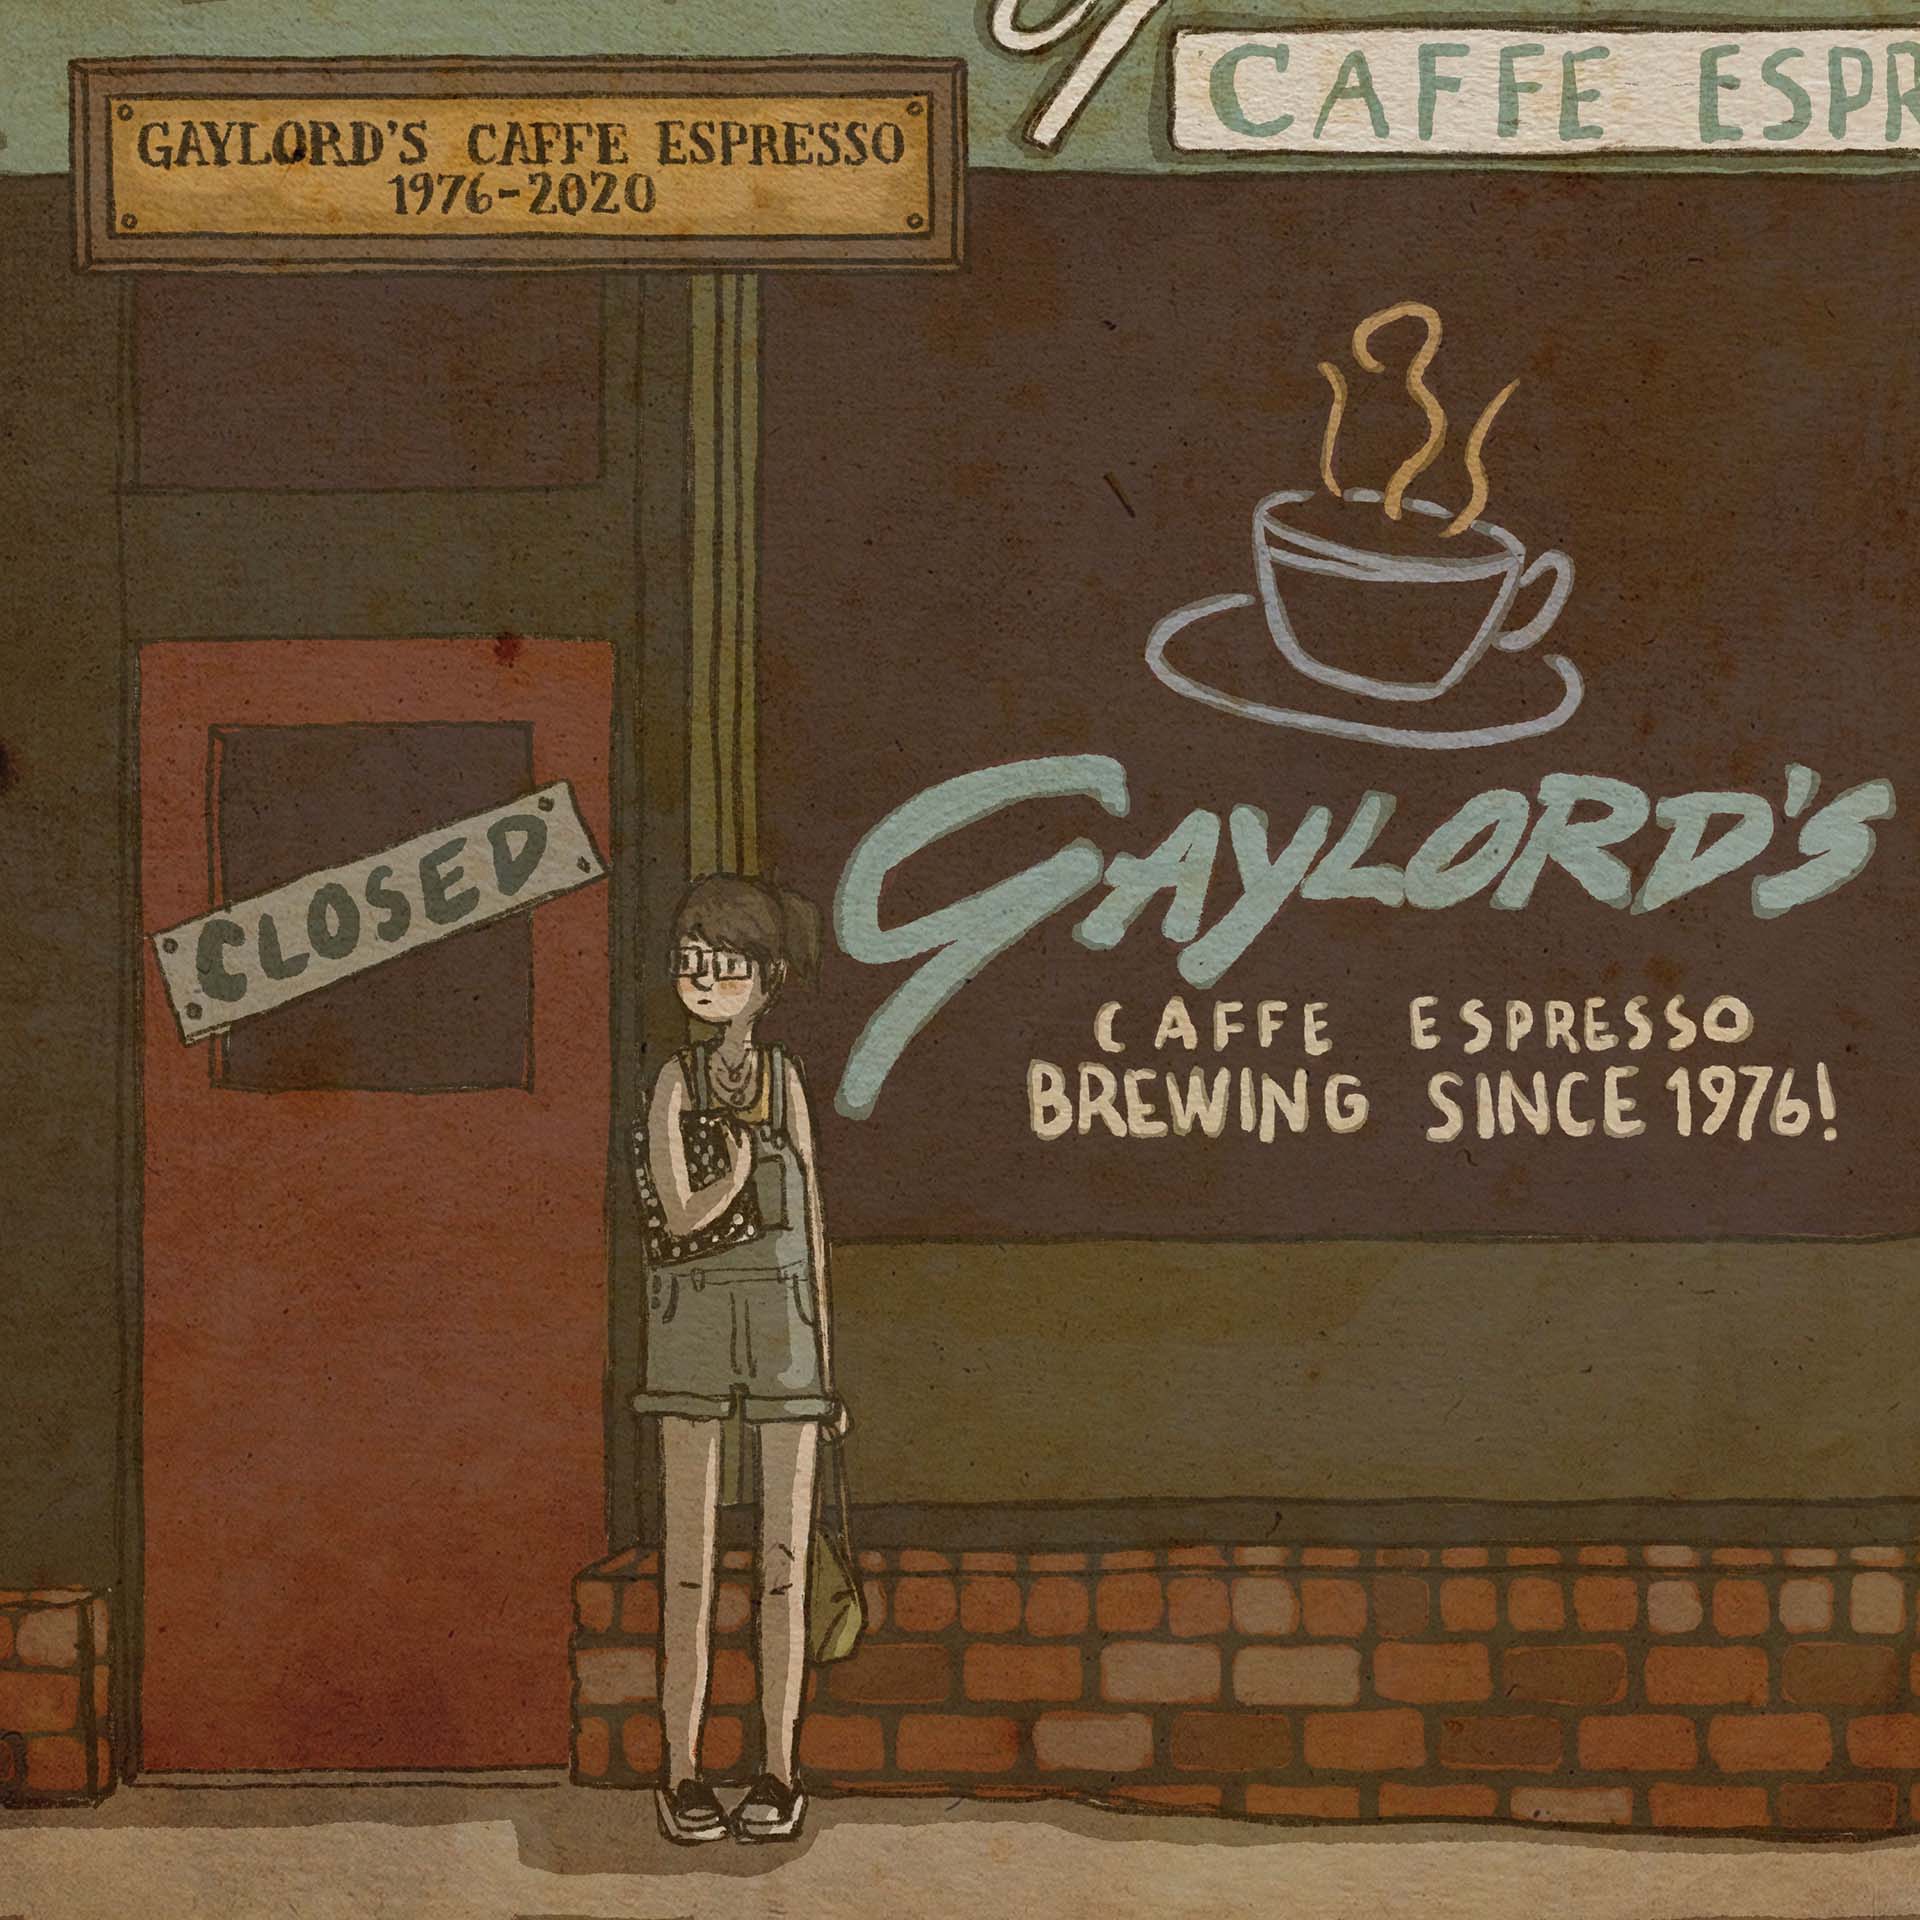 Briana in glasses and overall shorts stands outside of the coffee shop with a sad look on her face. The sign on the door says, "CLOSED," and the window lettering now clearly reads, "Gaylord's Caffe Espresso, brewing since 1976!" A plaque overhead reads, "Gaylord's Caffe Espresso, 1976–2020."